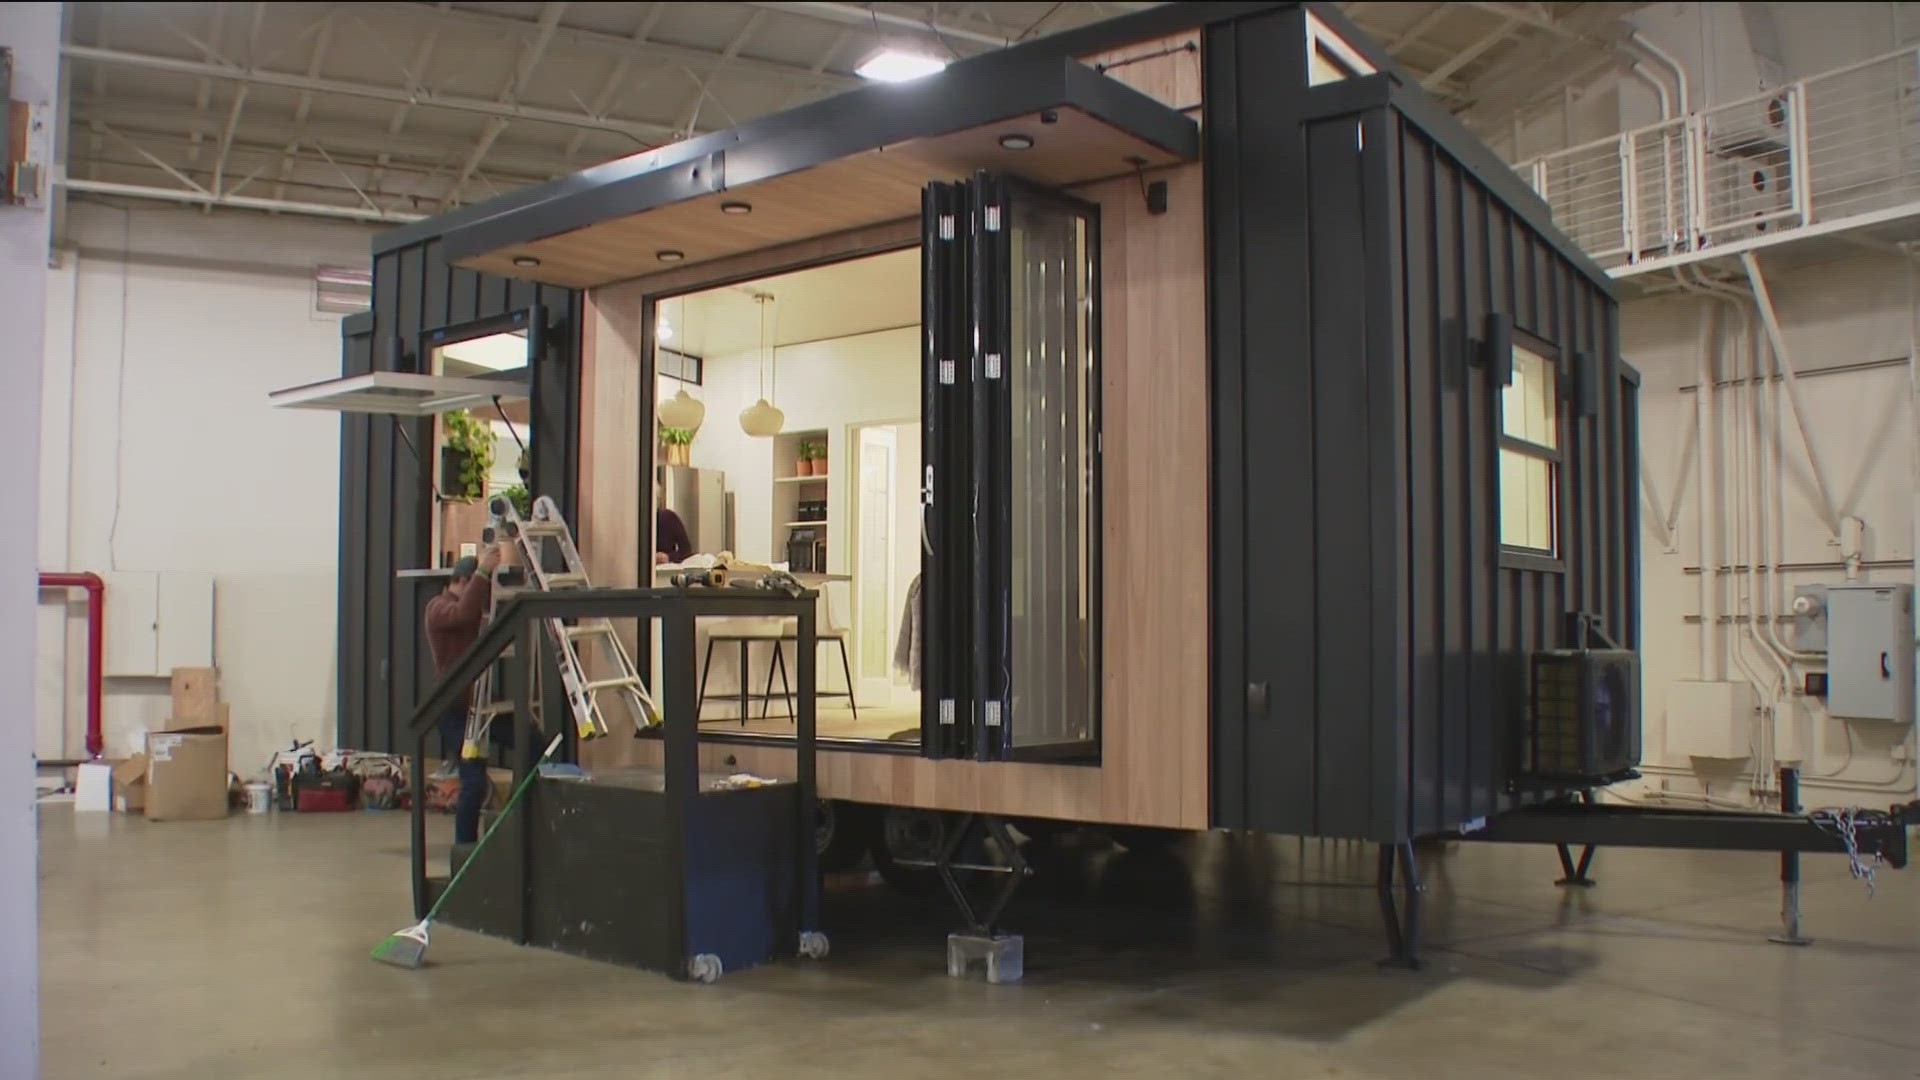 With housing prices soaring in San Diego County, people are looking to tiny homes as an affordable option. So what do they cost?